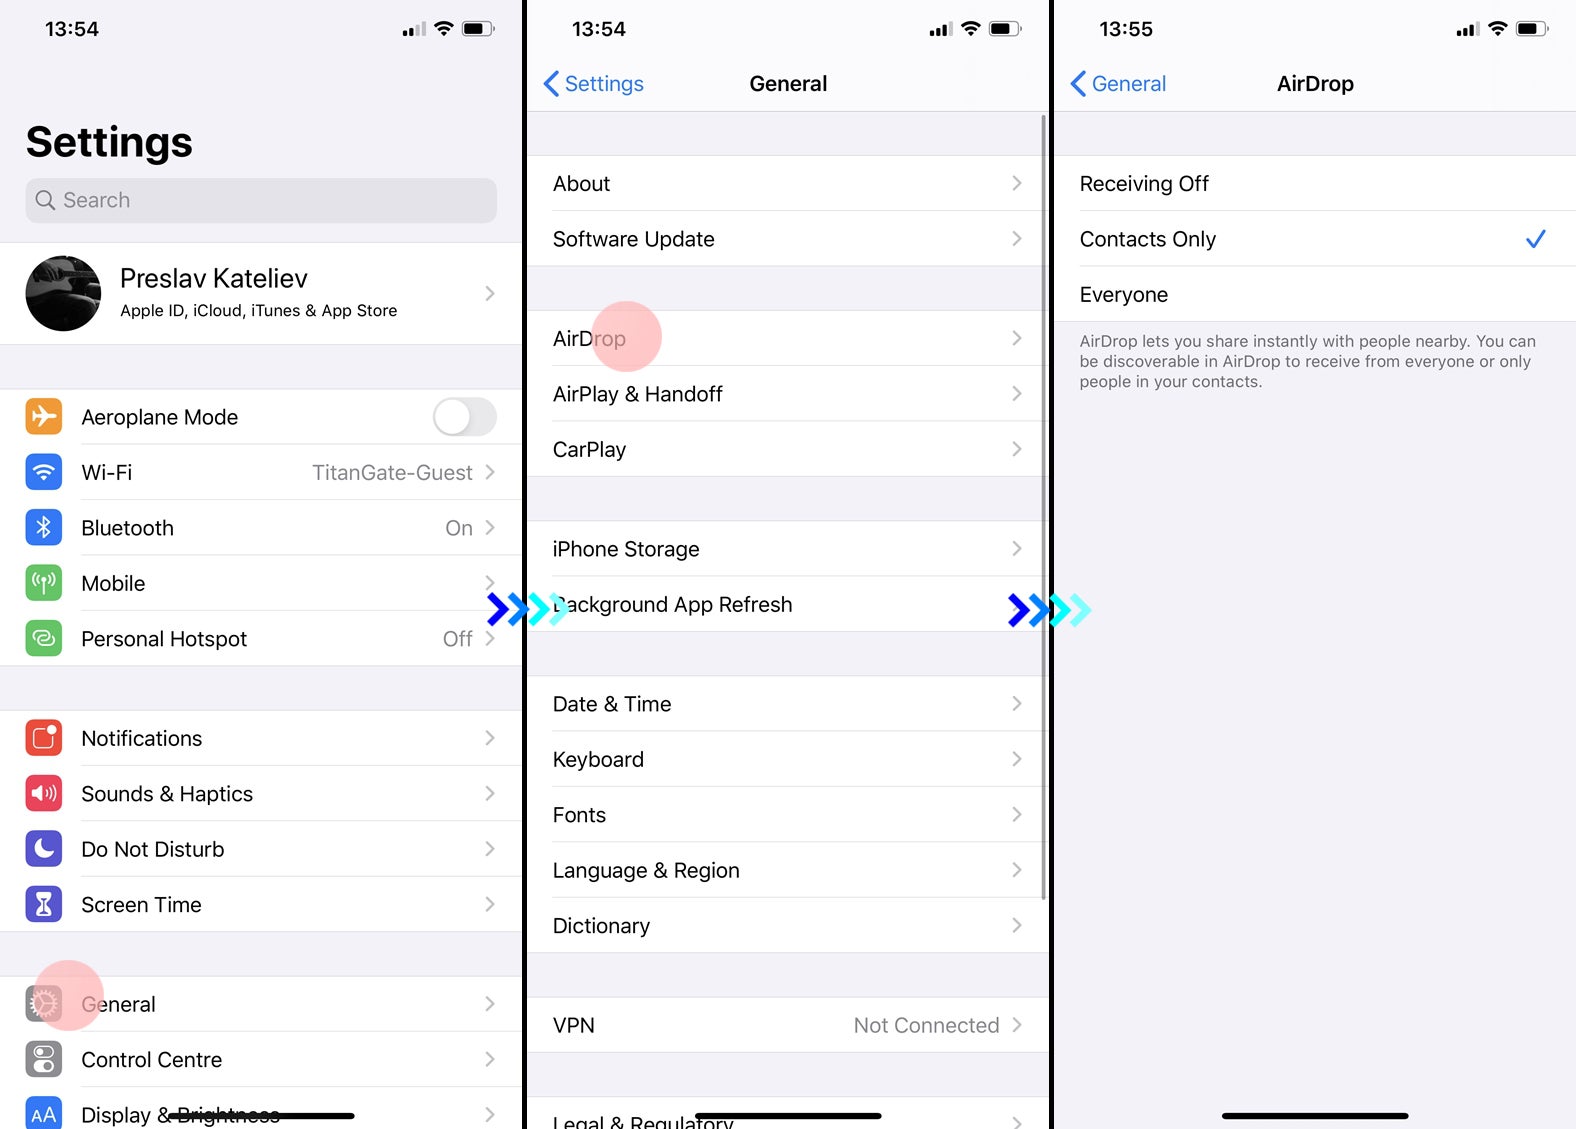 How to use AirDrop on your iPhone and iPad to share photos, videos, contacts, and links